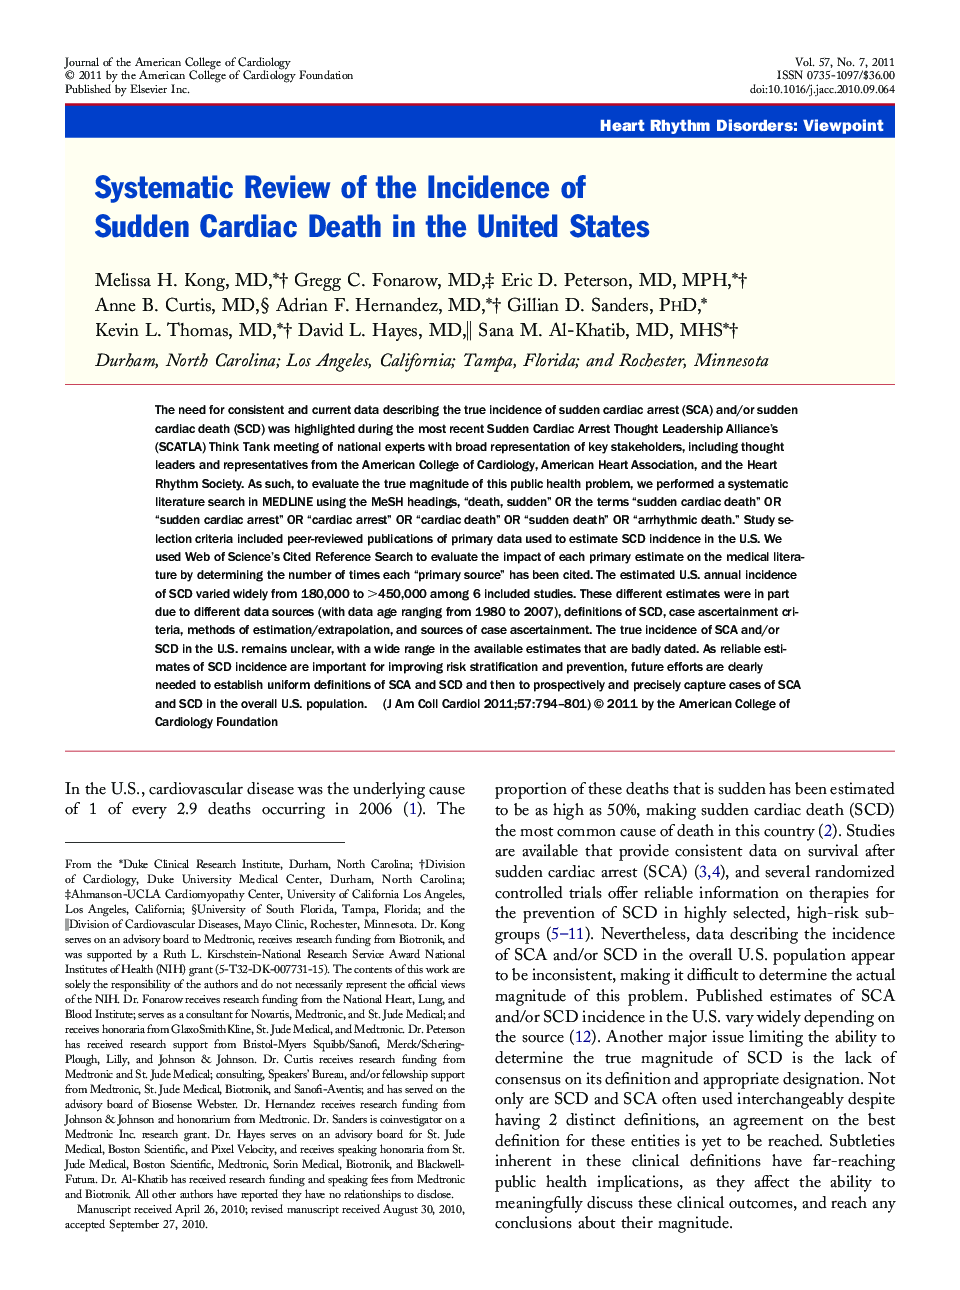 Systematic Review of the Incidence of Sudden Cardiac Death in the United States 